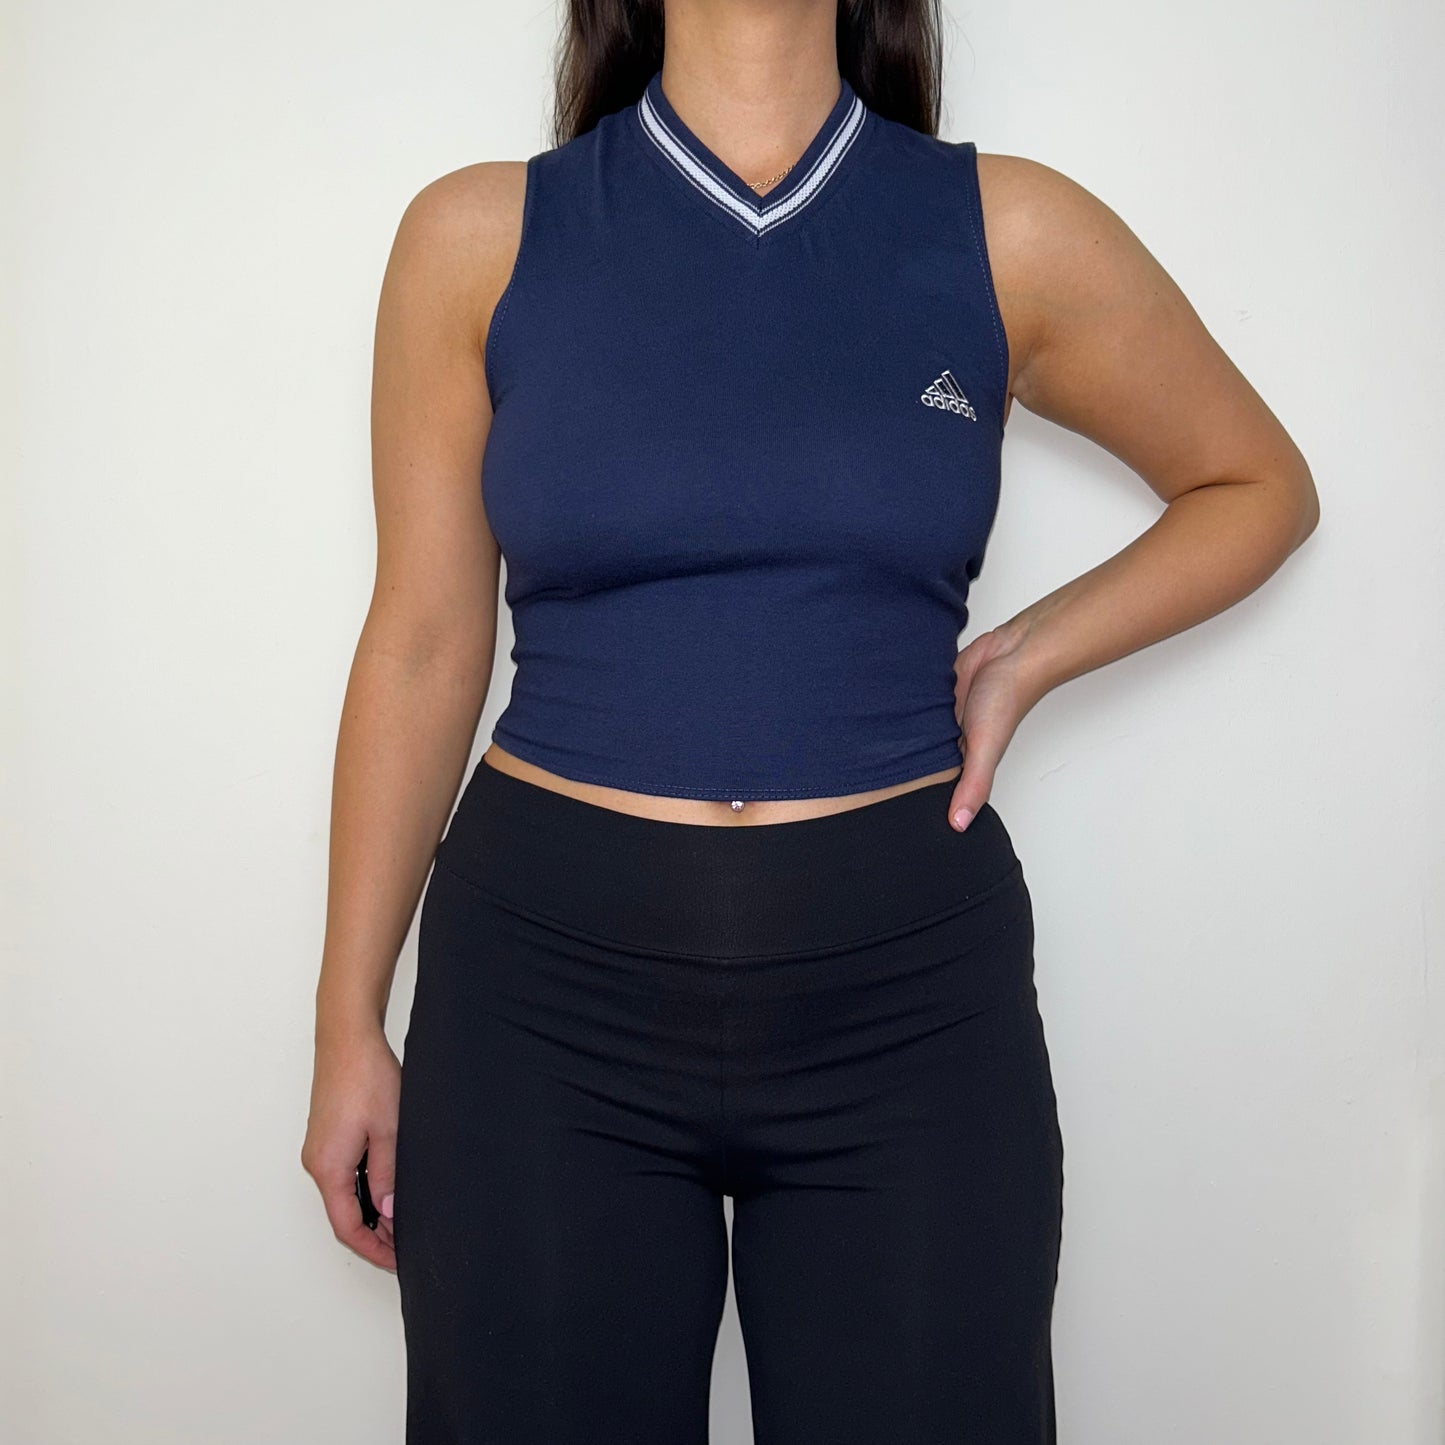 navy sleeveless crop top with white adidas logo shown on a model wearing black trousers